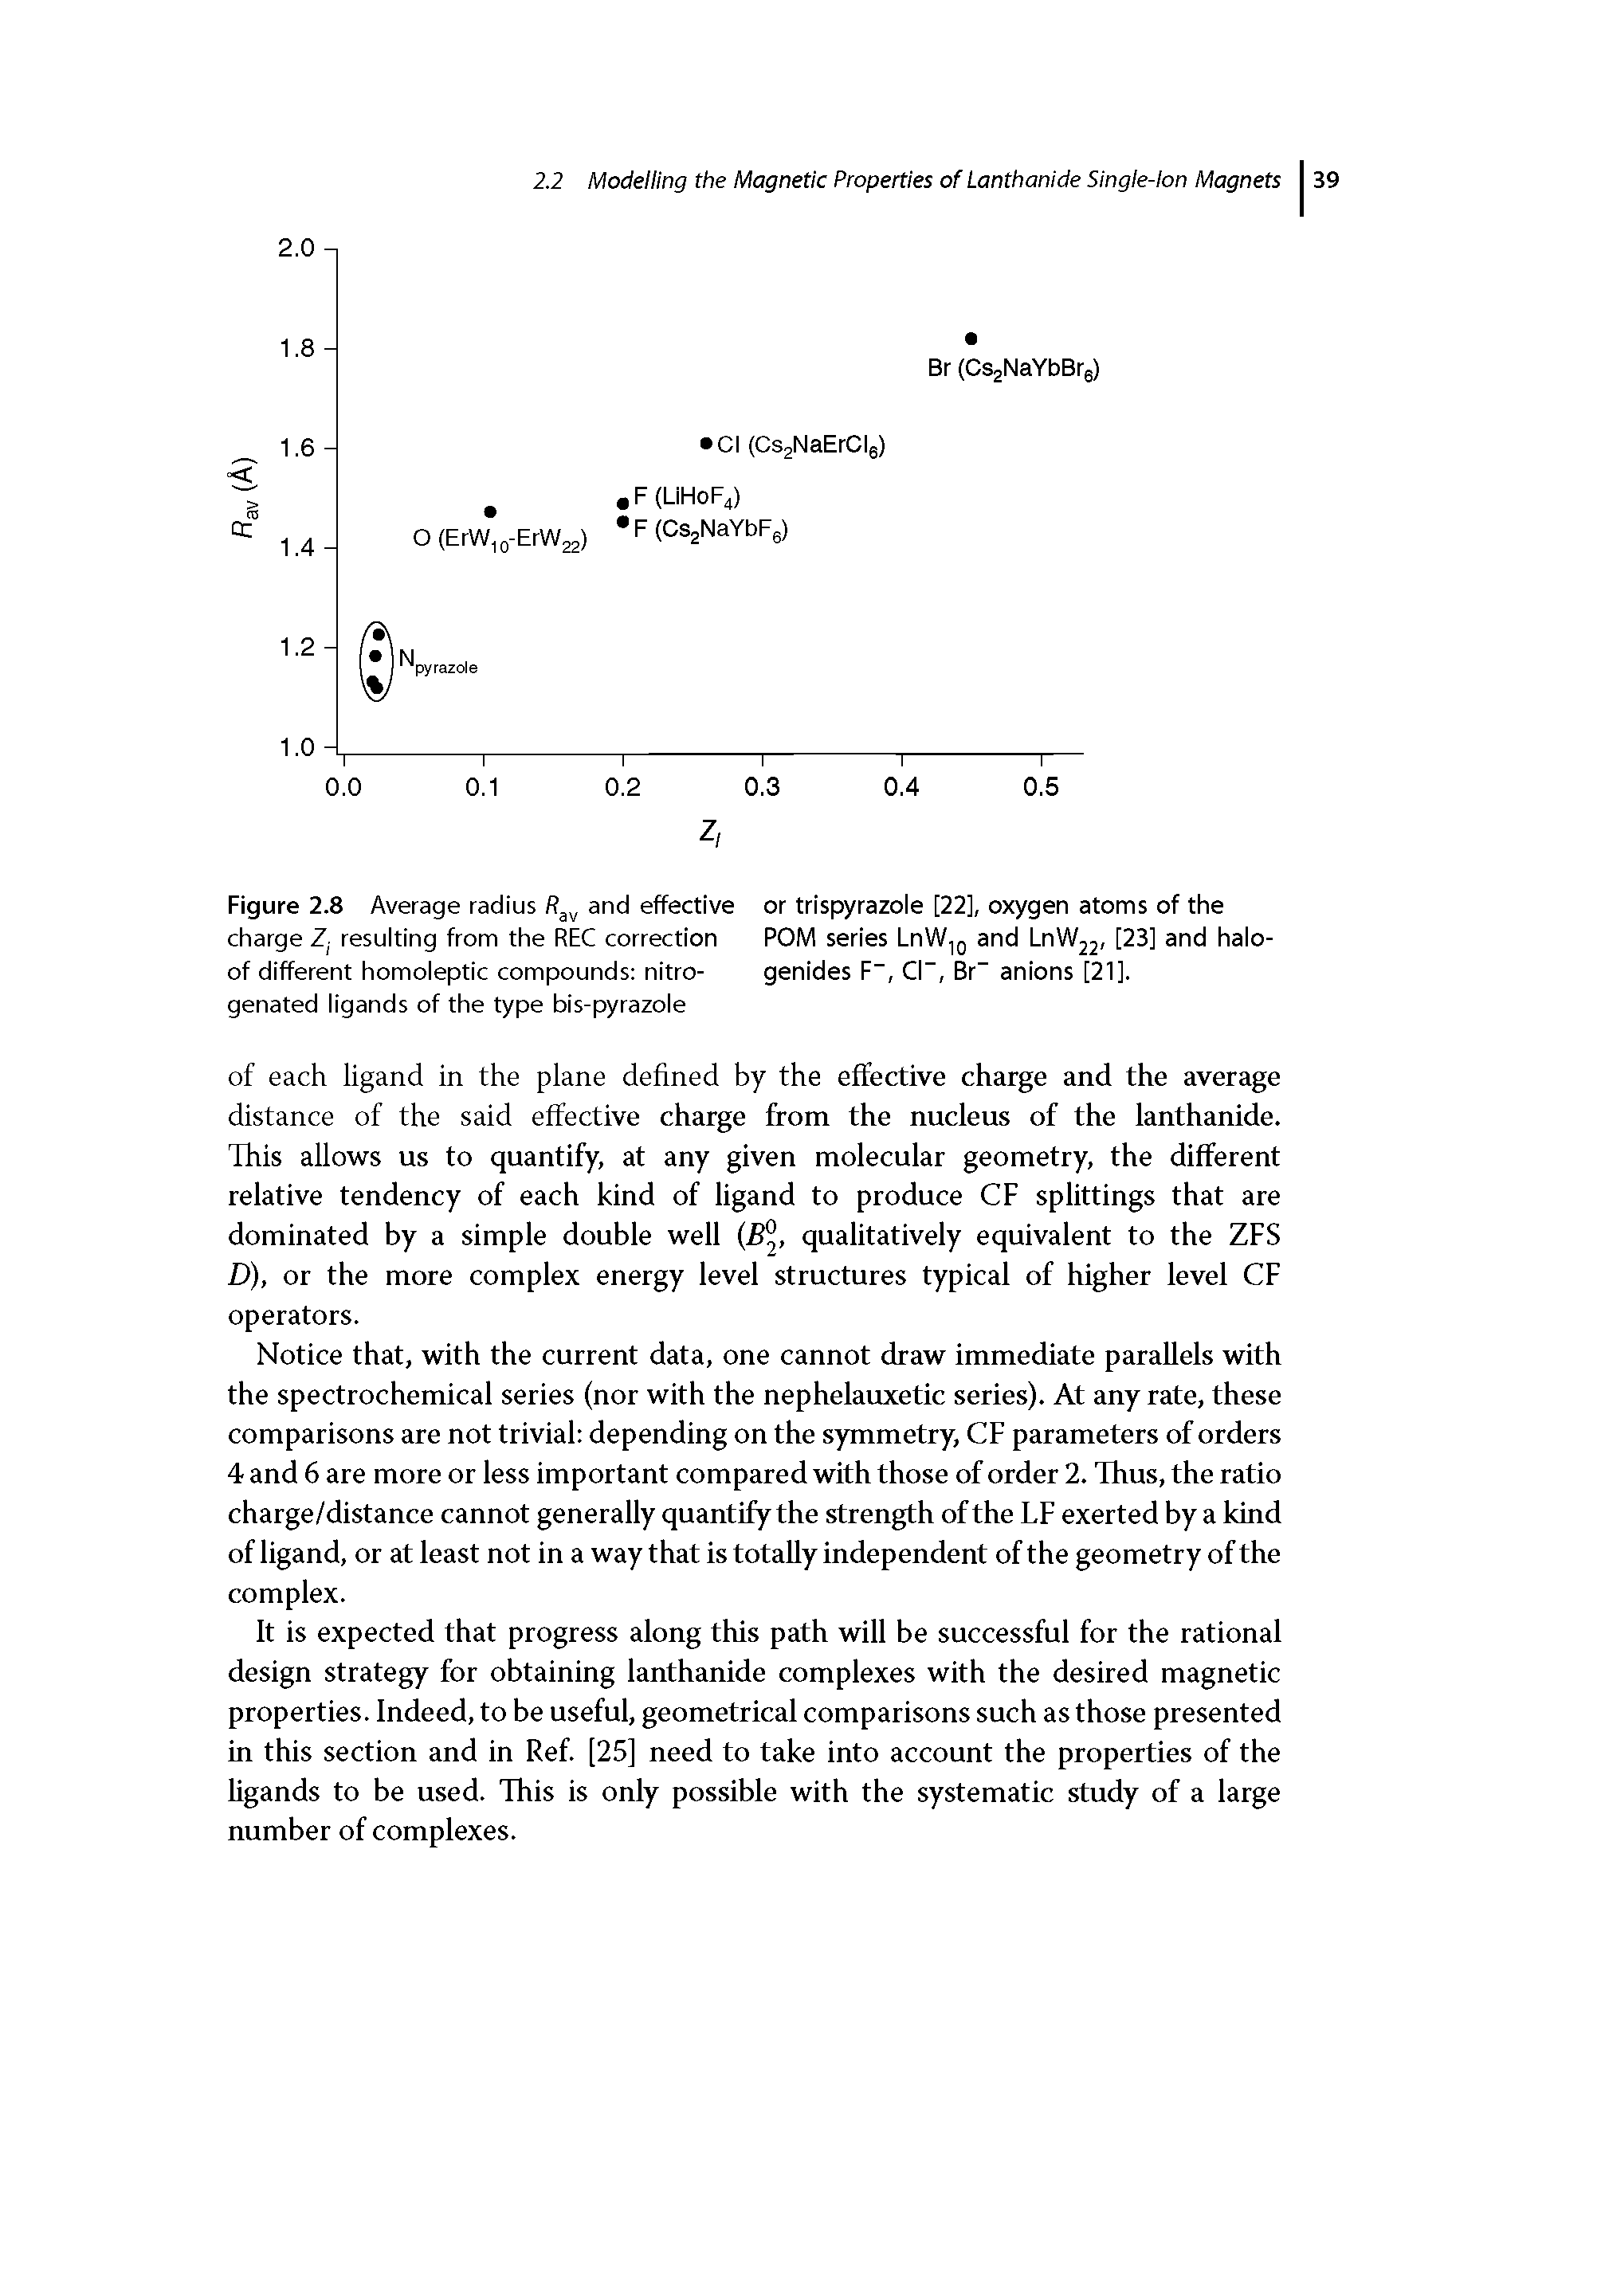 Figure 2.8 Average radius Rav and effective or trispyrazole [22], oxygen atoms of the charge Zf resulting from the REC correction POM series LnW10 and LnW22, [23] and halo-of different homoleptic compounds nitro- genides F , Cl-, Br" anions [21]. genated ligands of the type bis-pyrazole...